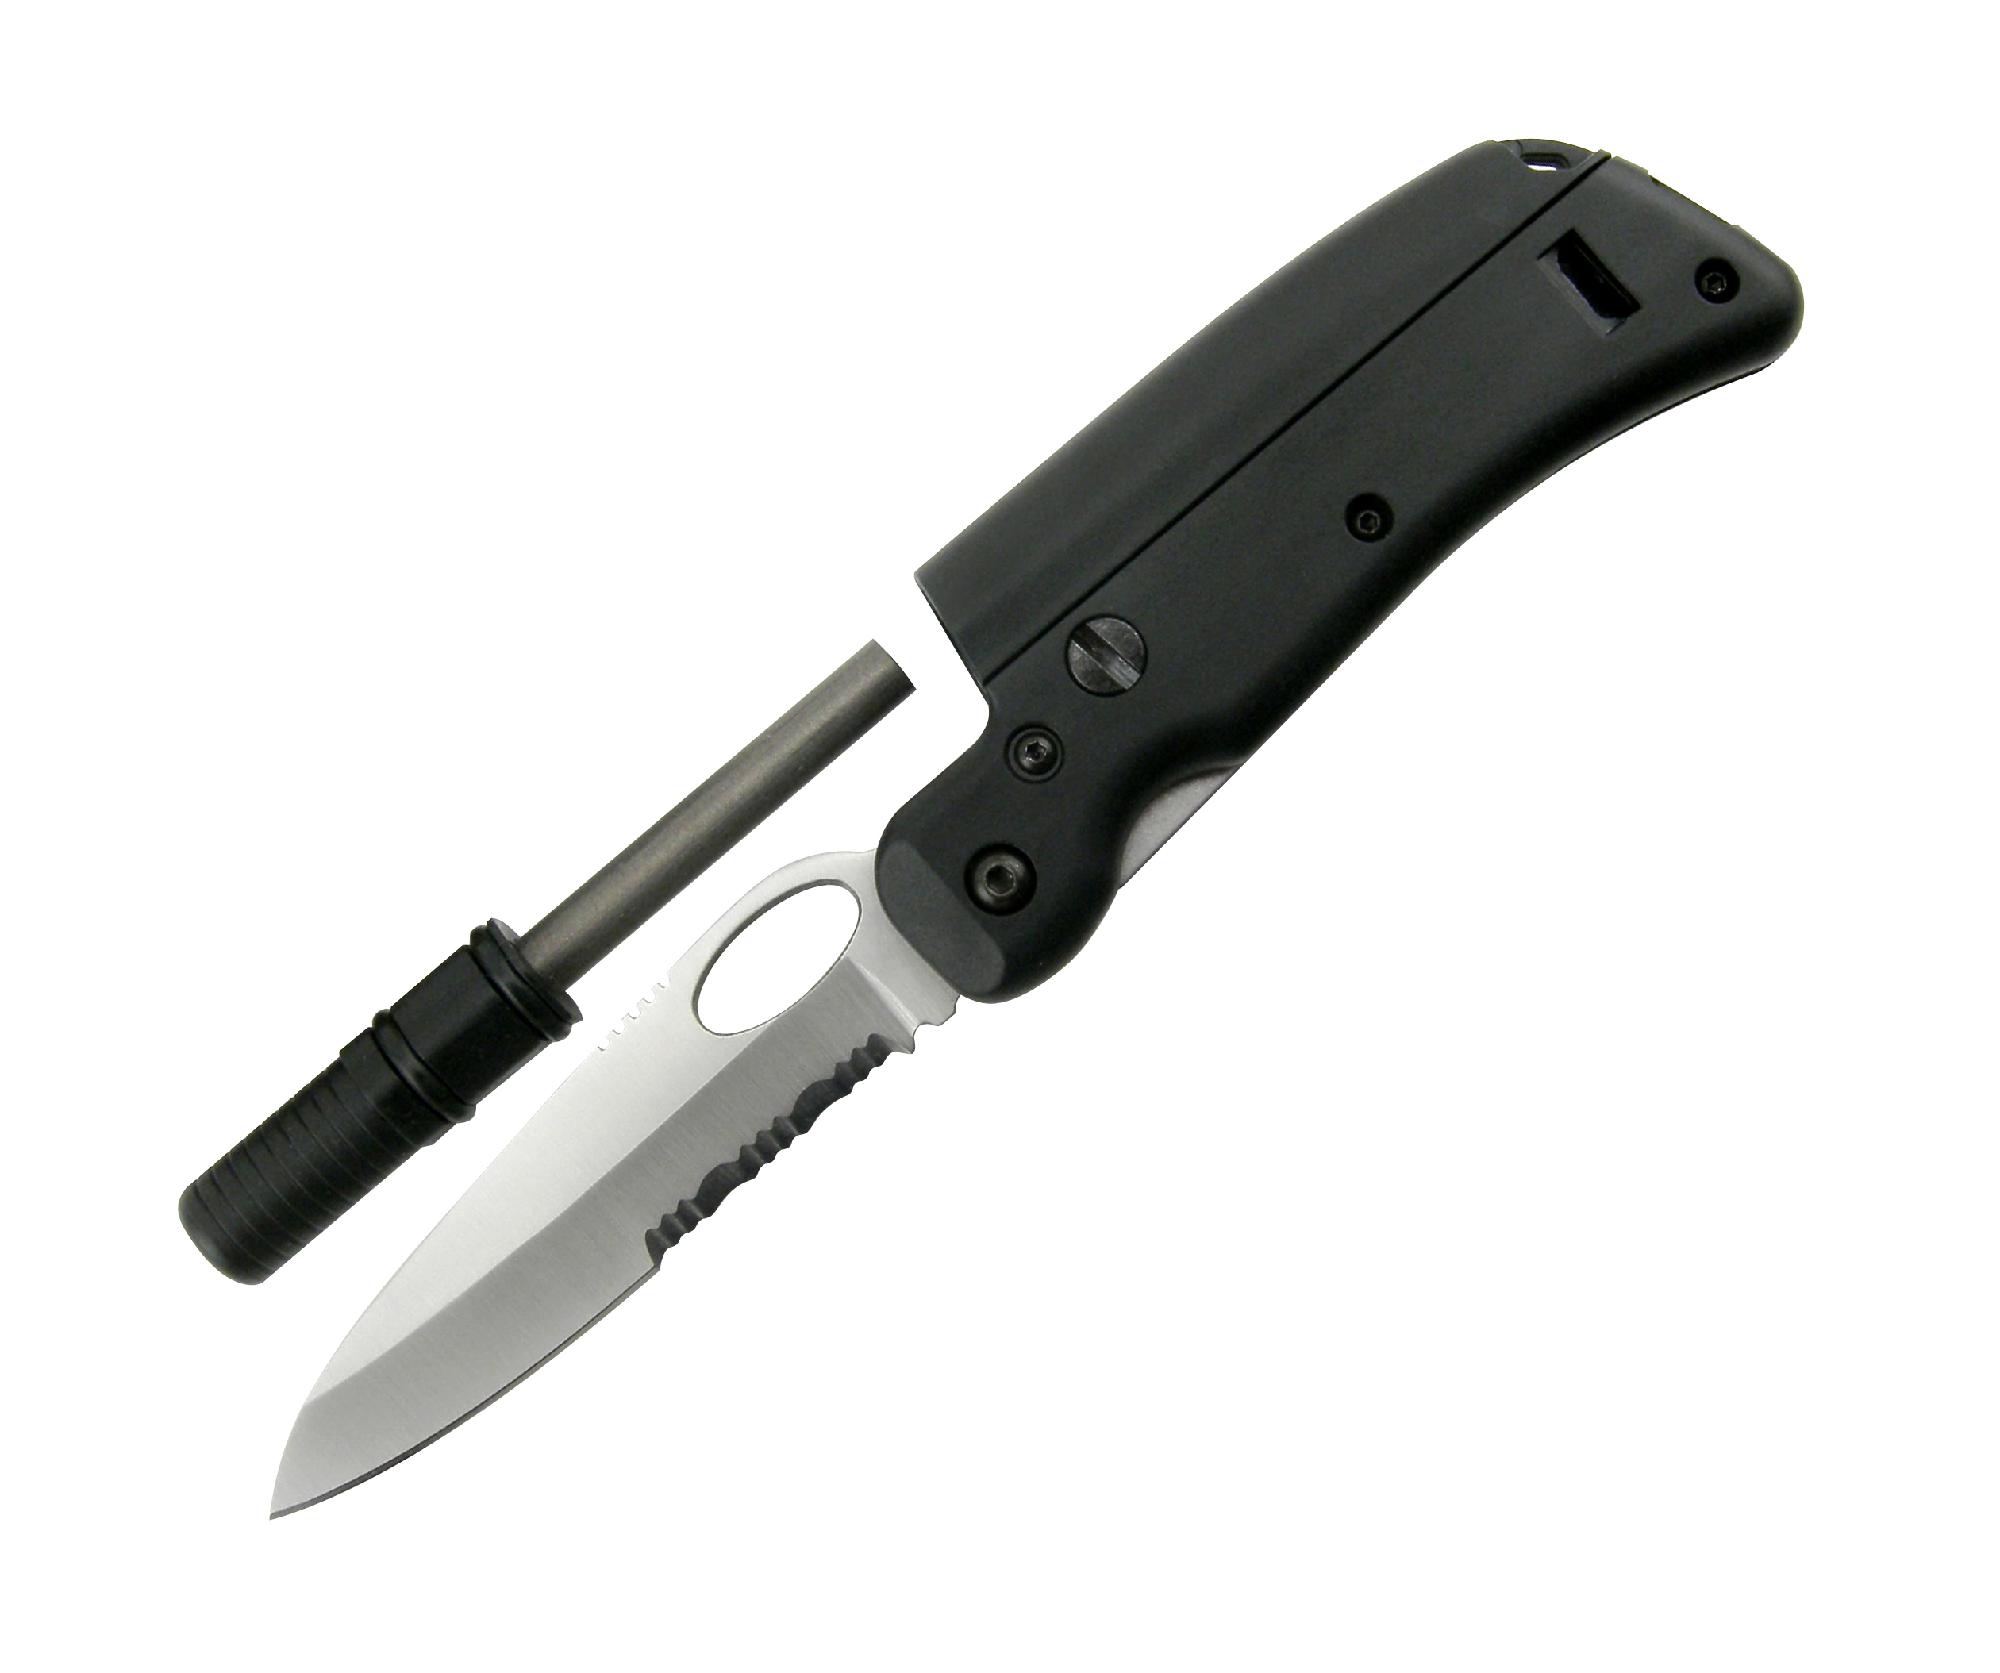 SL3 Fire Knife with 3-Inch Partially Serrated Blade with Whistle and Magnesium Fire Starter